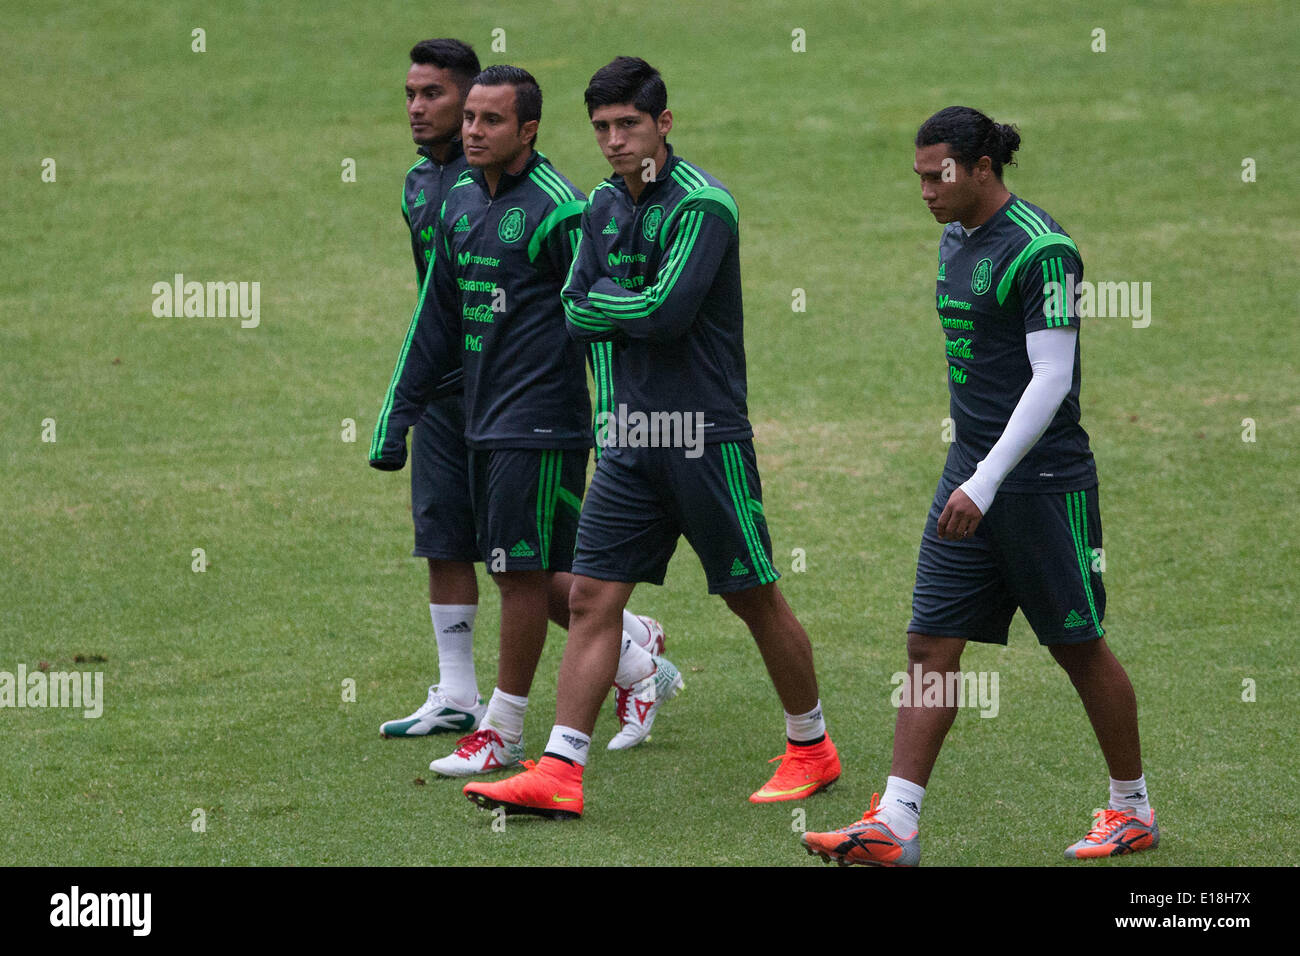 Mexico City, Mexico. 26th May, 2014. (L to R) Players Juan Vazquez, Luis Montes, Alan Pulido and Carlos Pena of Mexico's national soccer team, take part in a training session before the Brazil 2014 FIFA World Cup, in the Azteca Stadium, in Mexico City, capital of Mexico, on May 26, 2014. Credit:  Pedro Mera/Xinhua/Alamy Live News Stock Photo